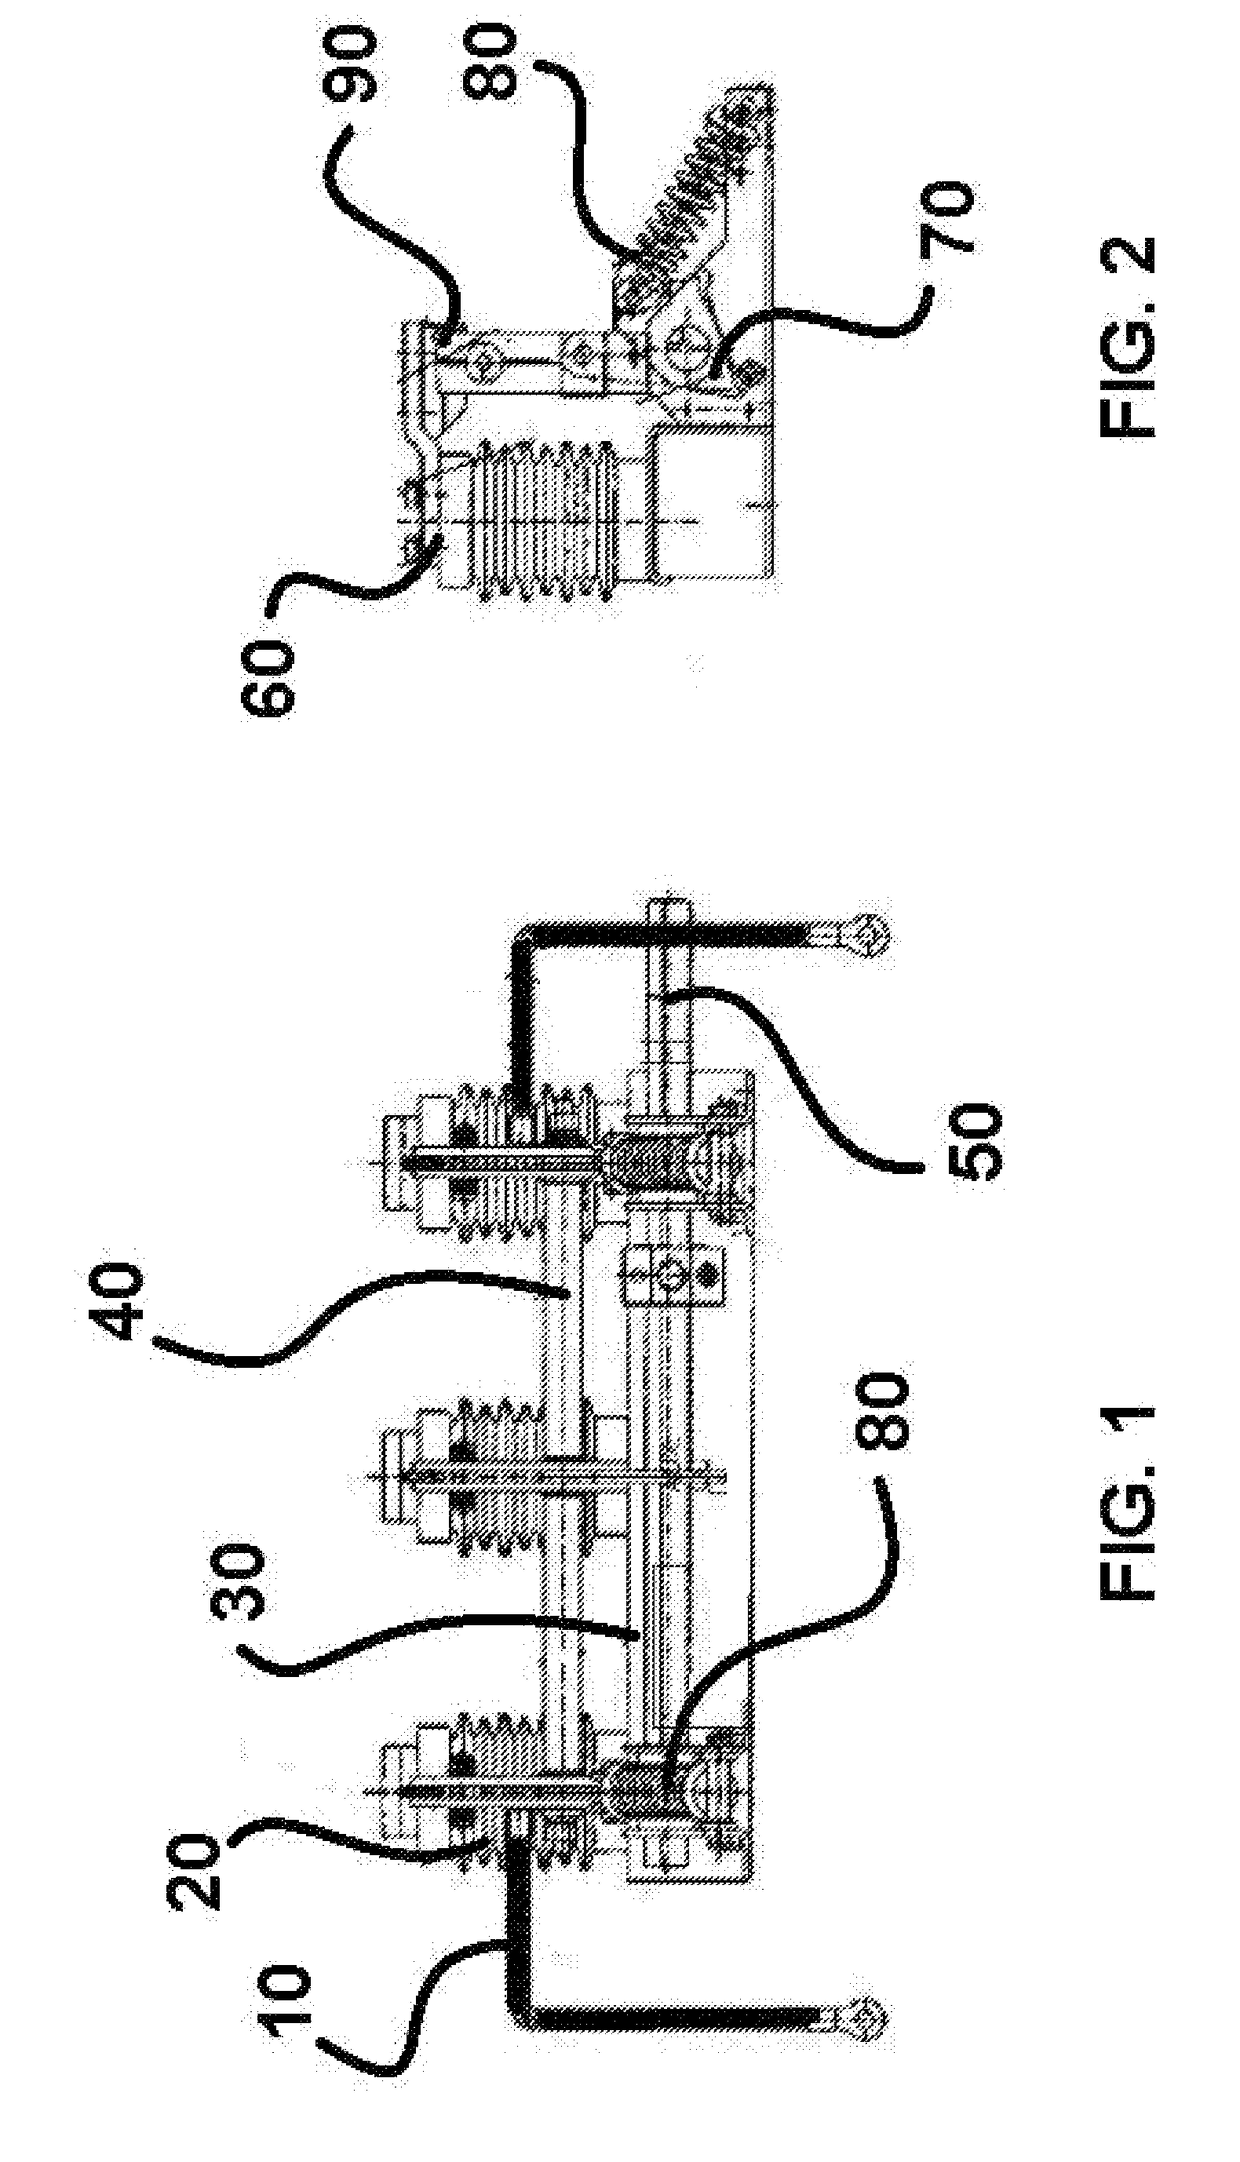 Grounding Switch for Use in Metal-Clad Switchgear